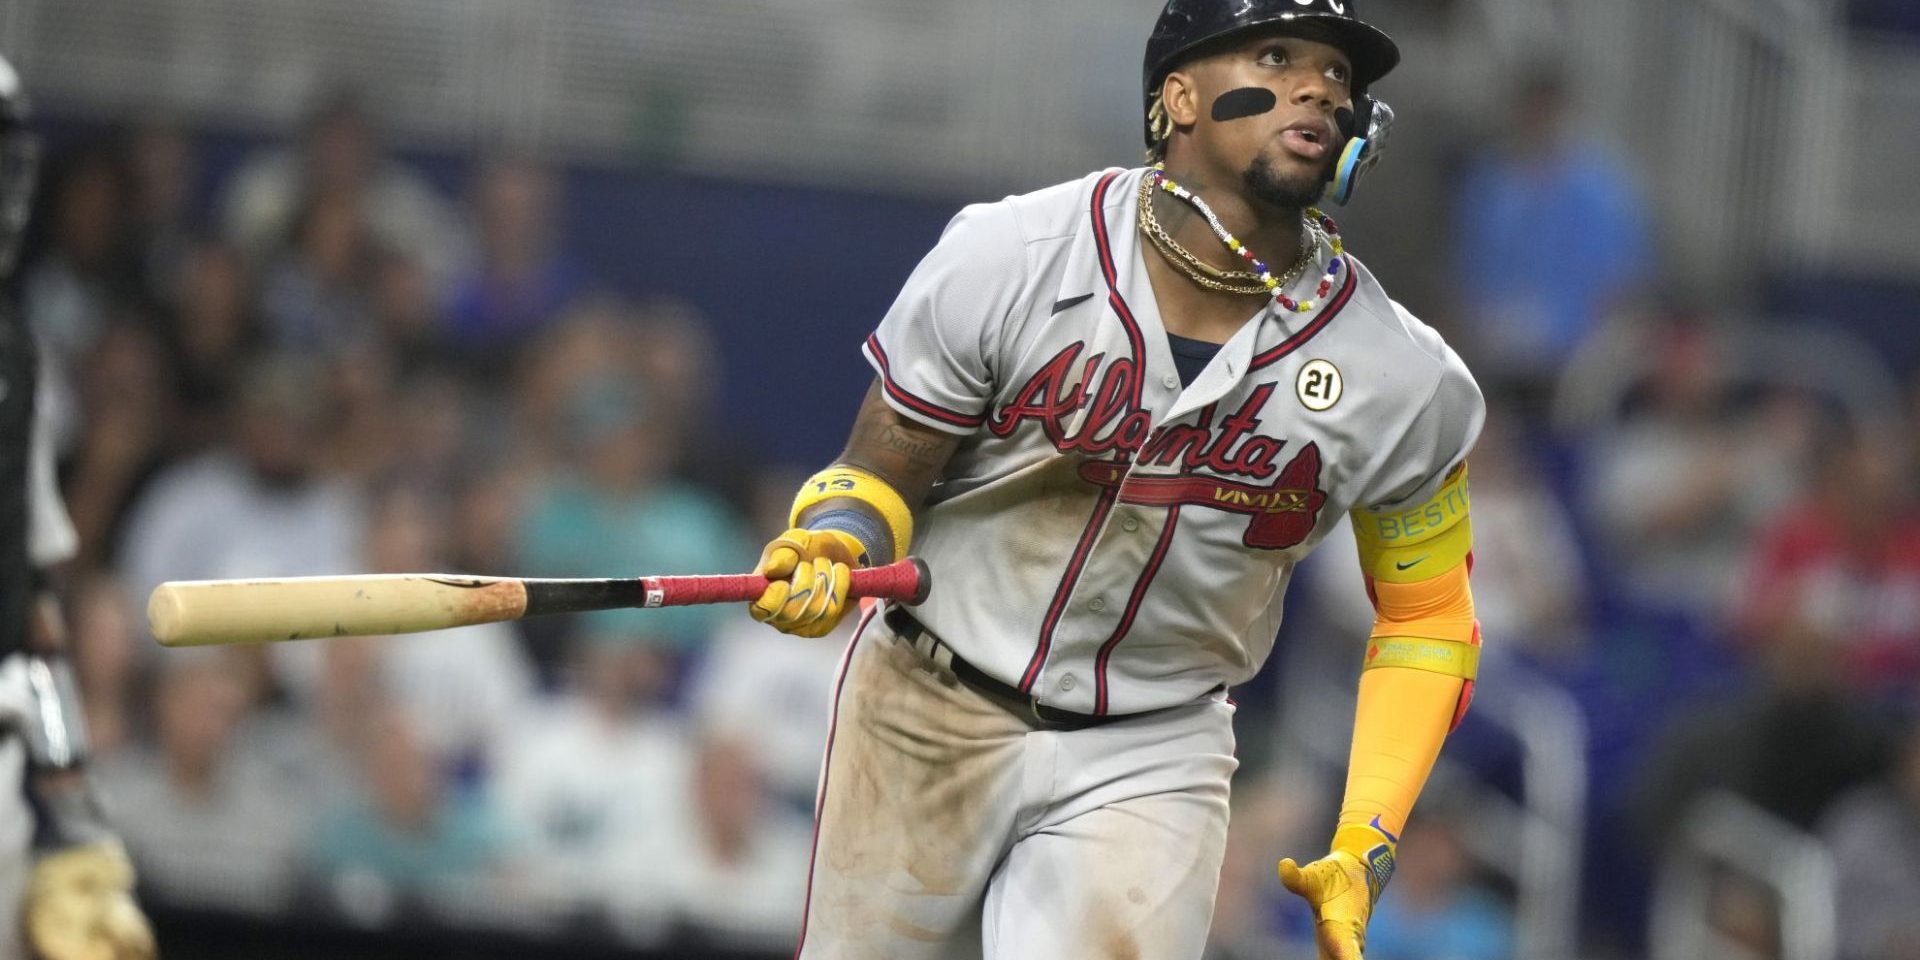 Atlanta Braves right fielder Ronald Acuna Jr. flies out during the fourth inning of a baseball game against the Miami Marlins, Friday, Sept. 15, 2023, in Miami. (AP Photo/Lynne Sladky)